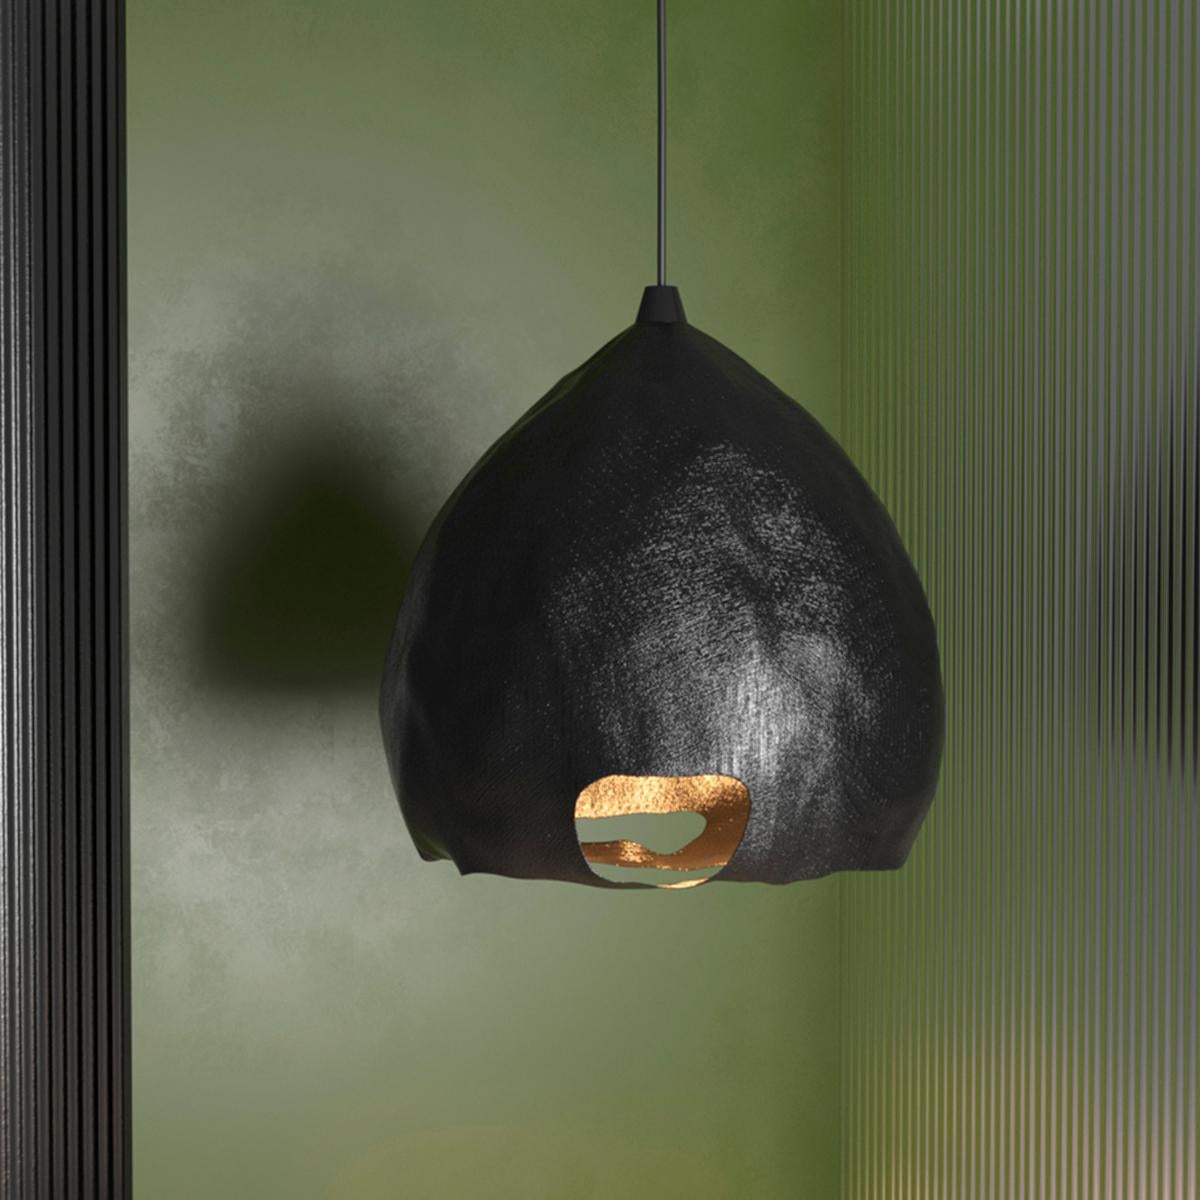 Makivka ceramic pendant lamp by Makhno
Dimensions: D 50 x H 55 cm
Materials: Copper
Also available in ceramic.

All our lamps can be wired according to each country. If sold to the USA it will be wired for the USA for instance.

Makivka grows